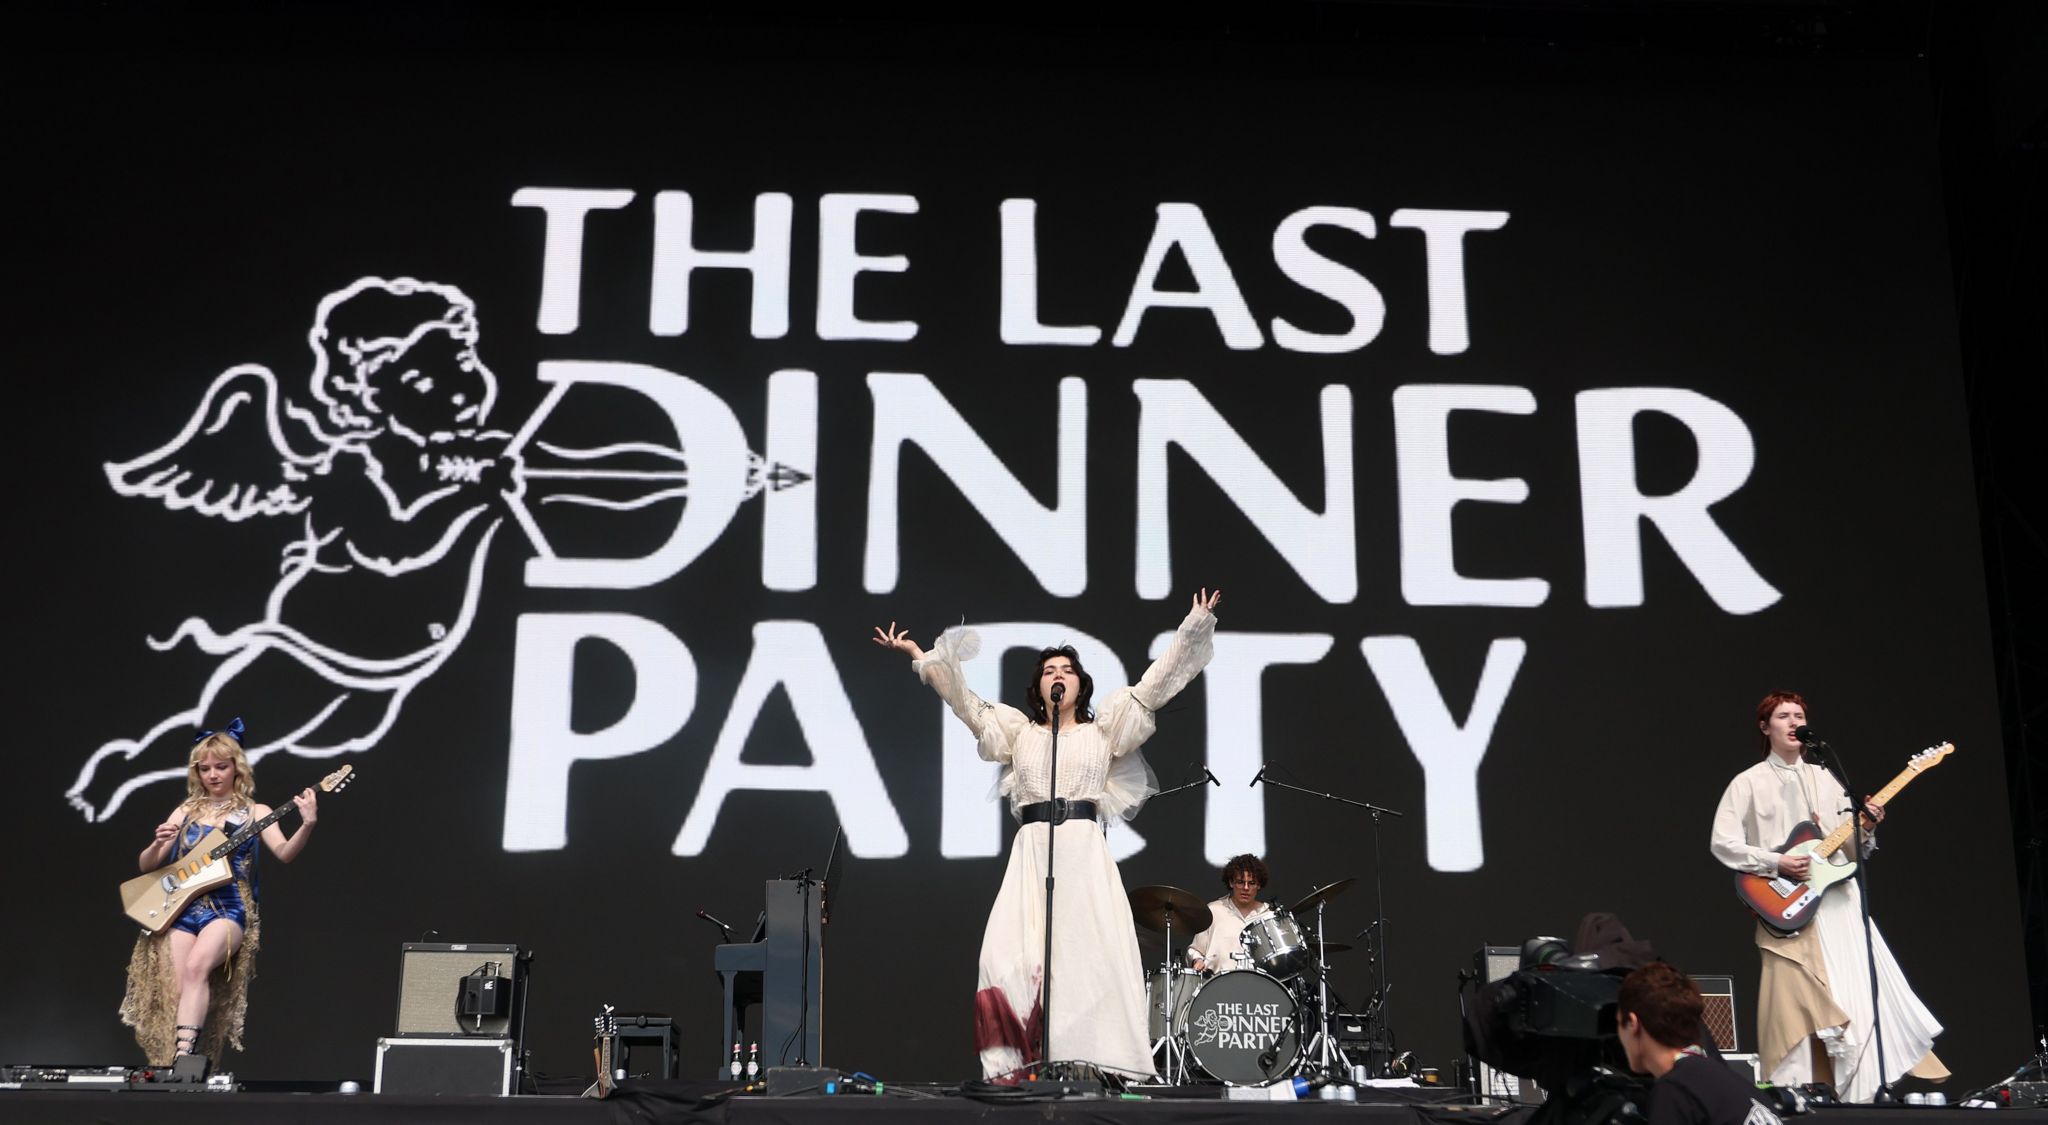 Band members on stage wearing white address a black background with the words 'the Last Dinner Party' written on